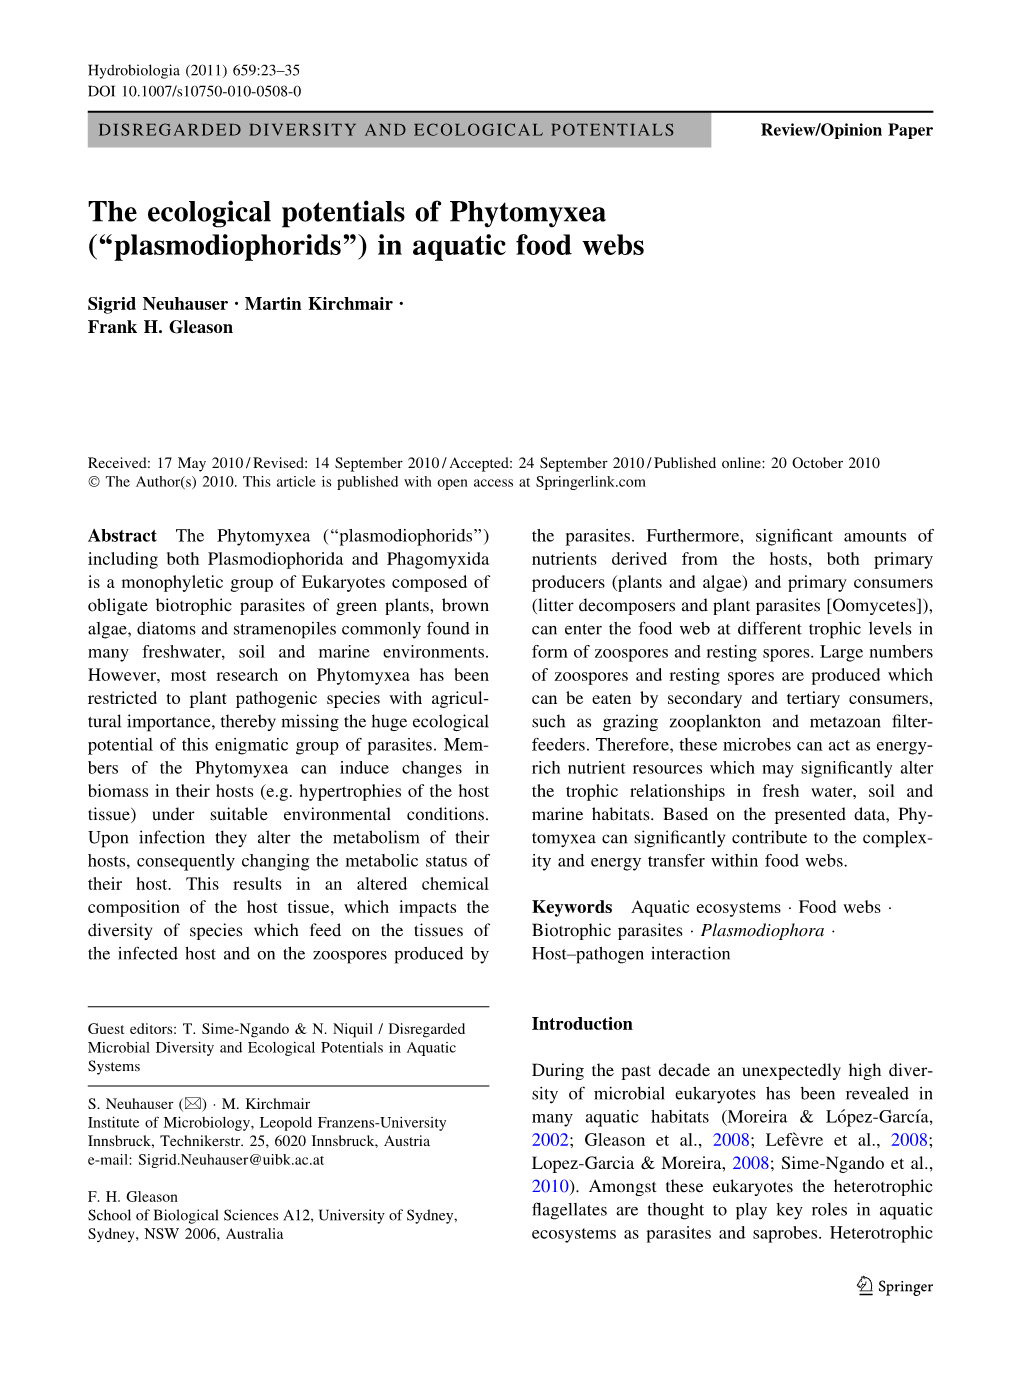 The Ecological Potentials of Phytomyxea (''Plasmodiophorids